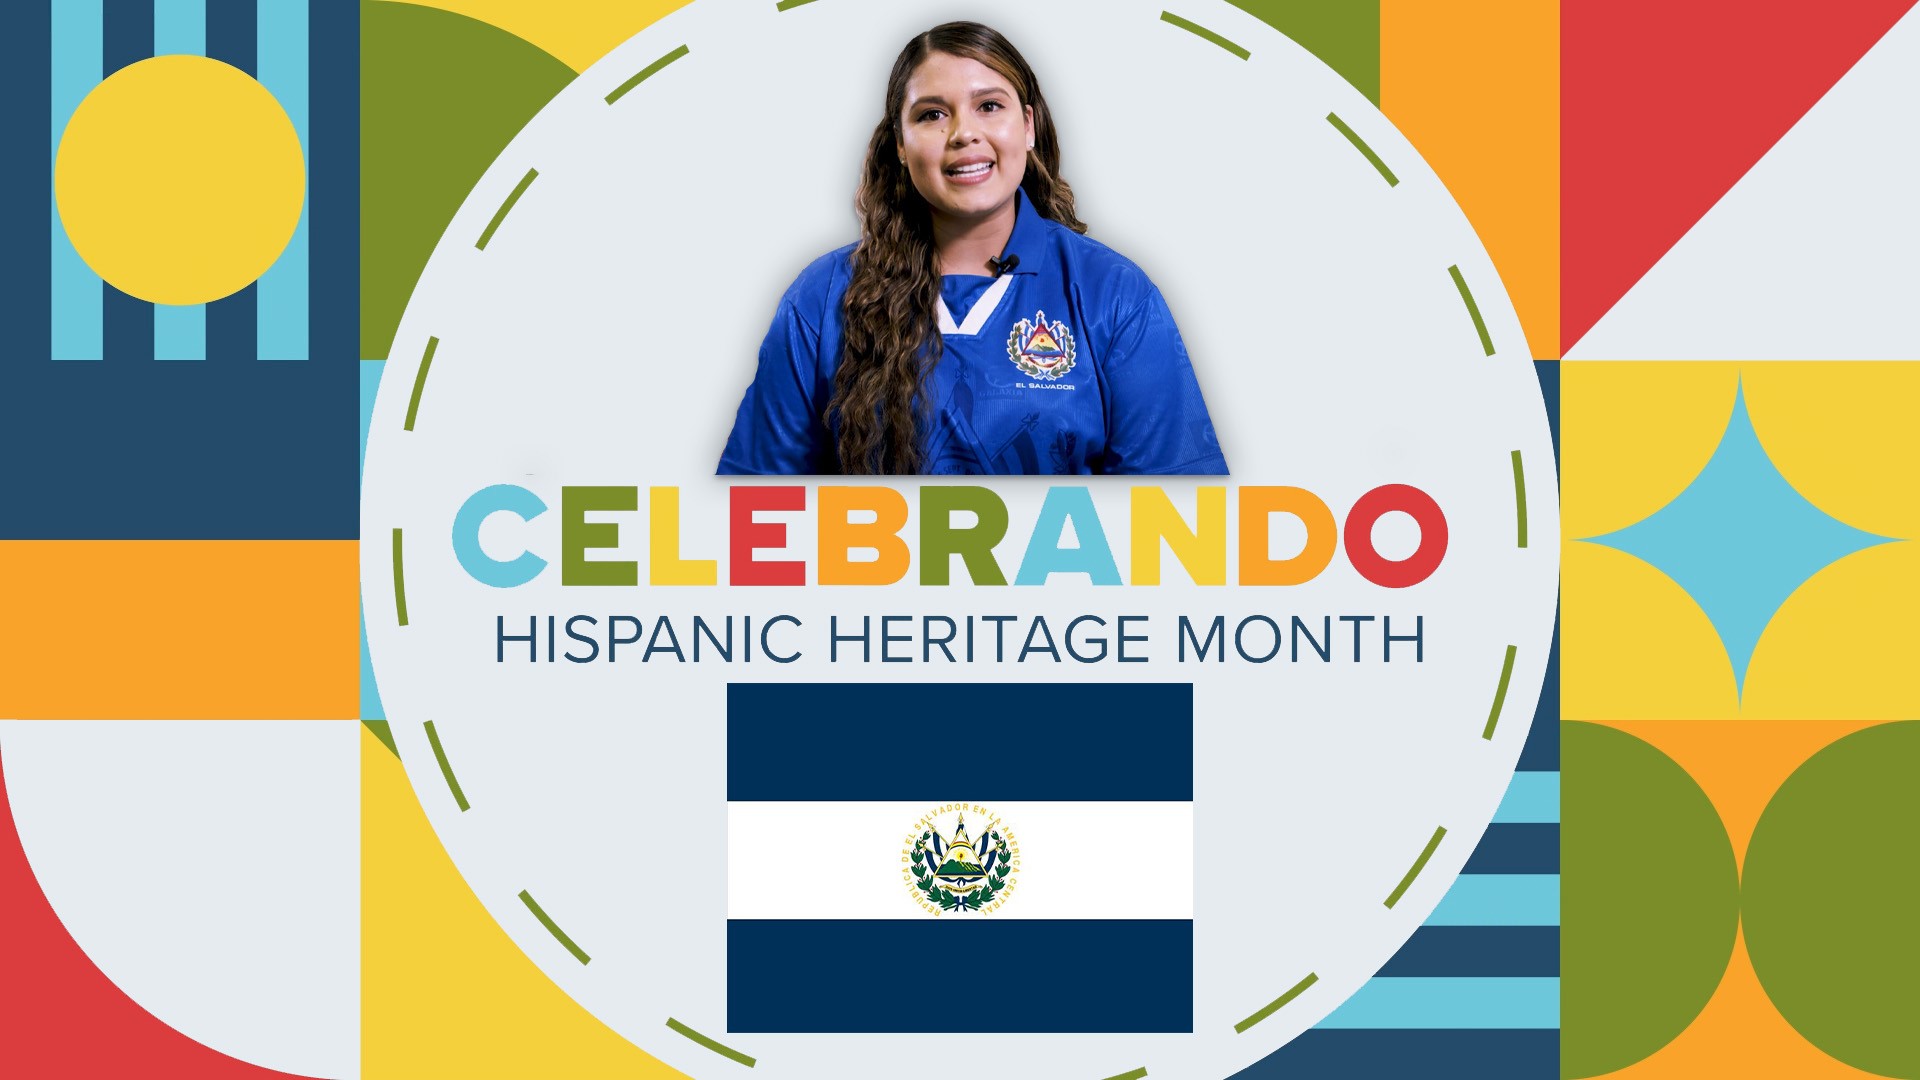 Patricia Parra, is from El Salvador and says being Latina is to be part of a strong lineage of dedicated, hard-working, intellectual, and influential people.